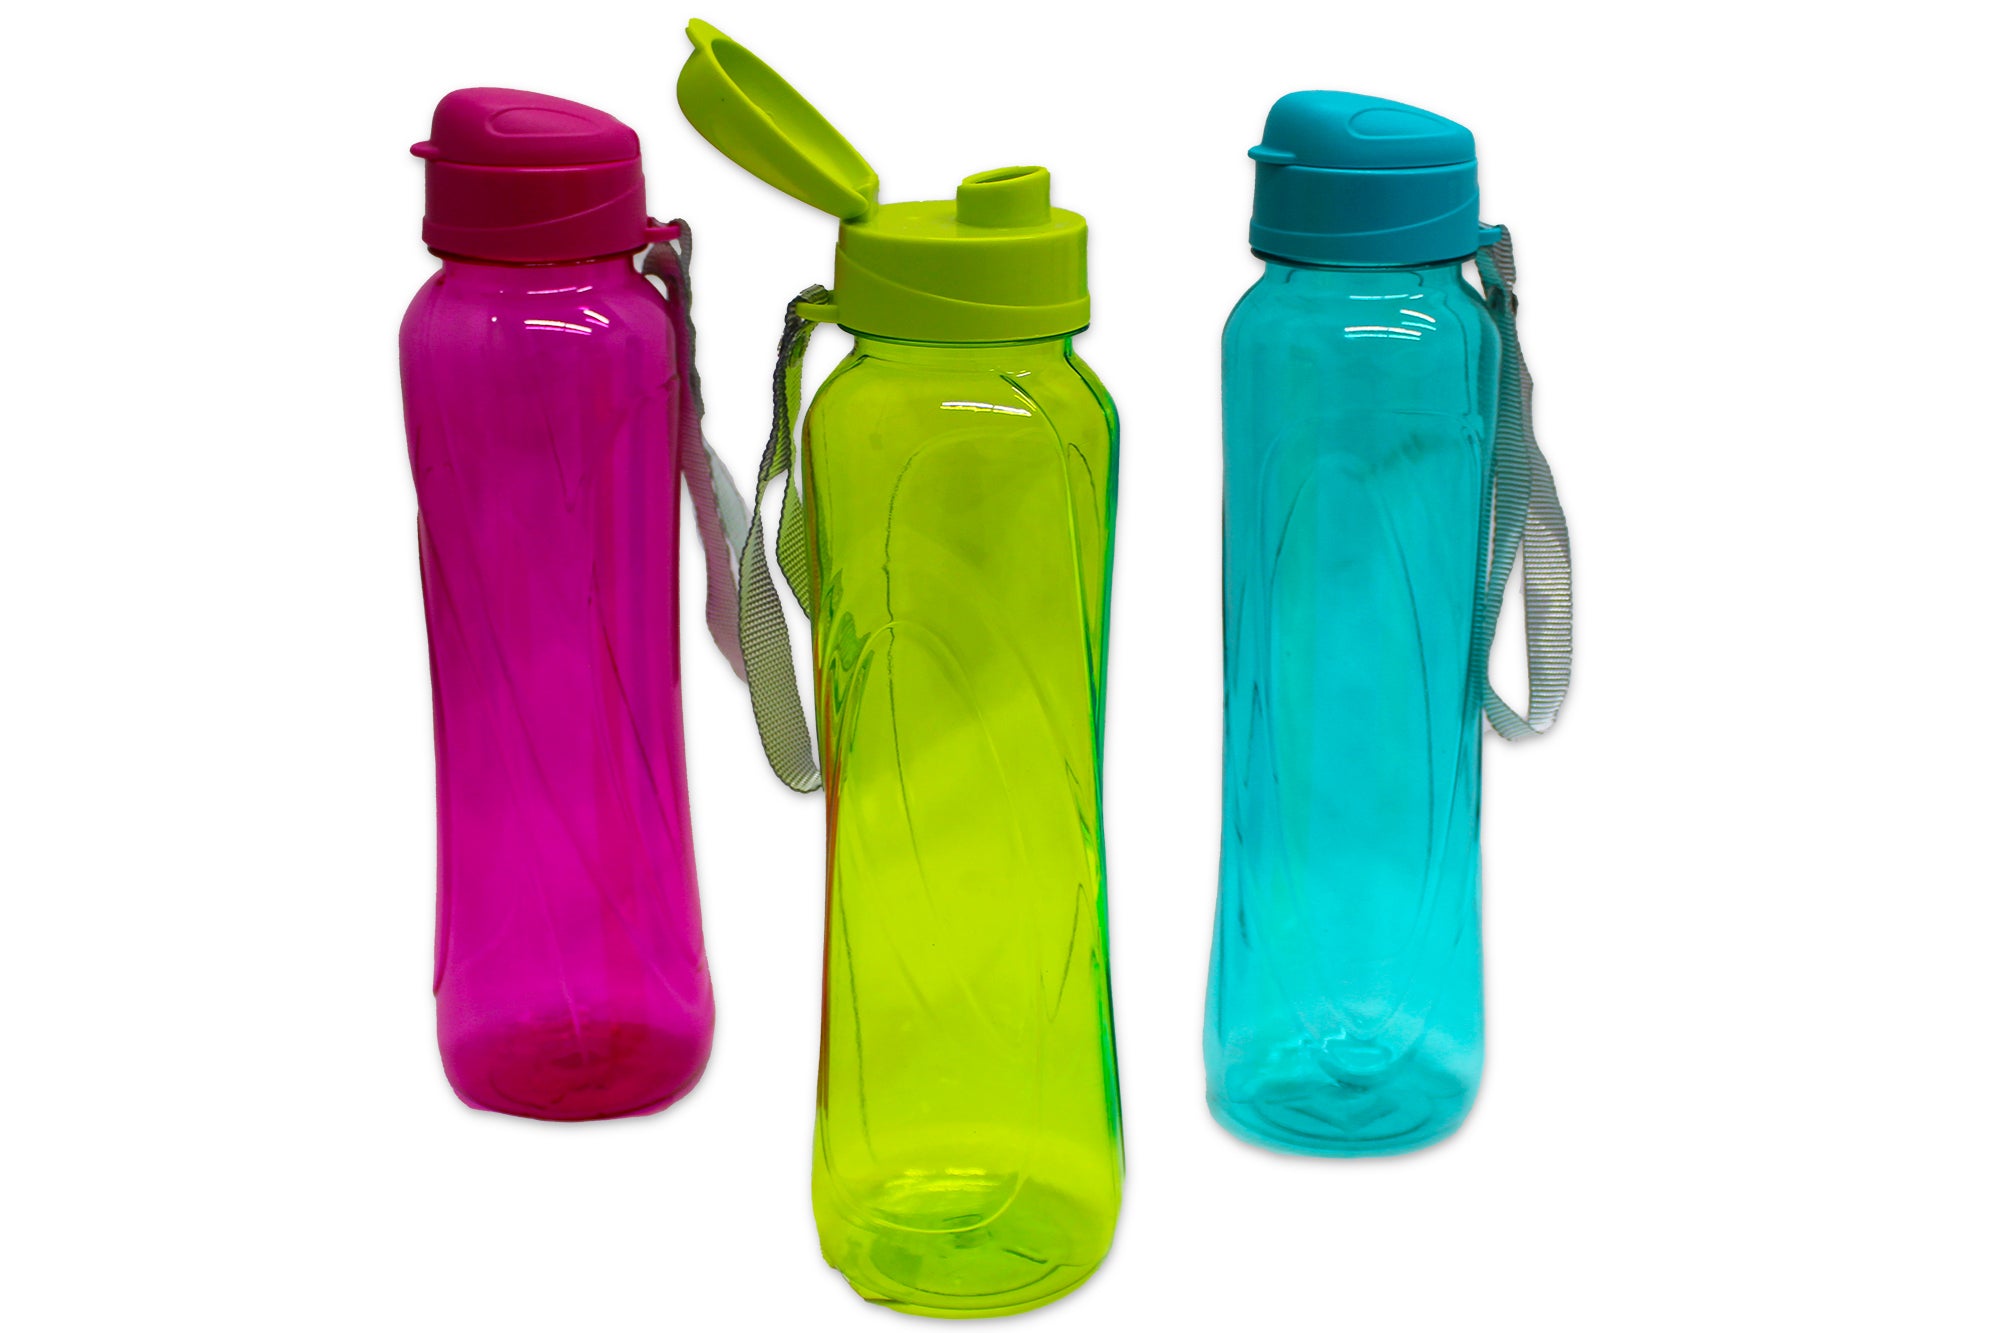 Set of 3 600ml Sky Plastic Sports Water Bottle with Strap and Snap Lock Lid